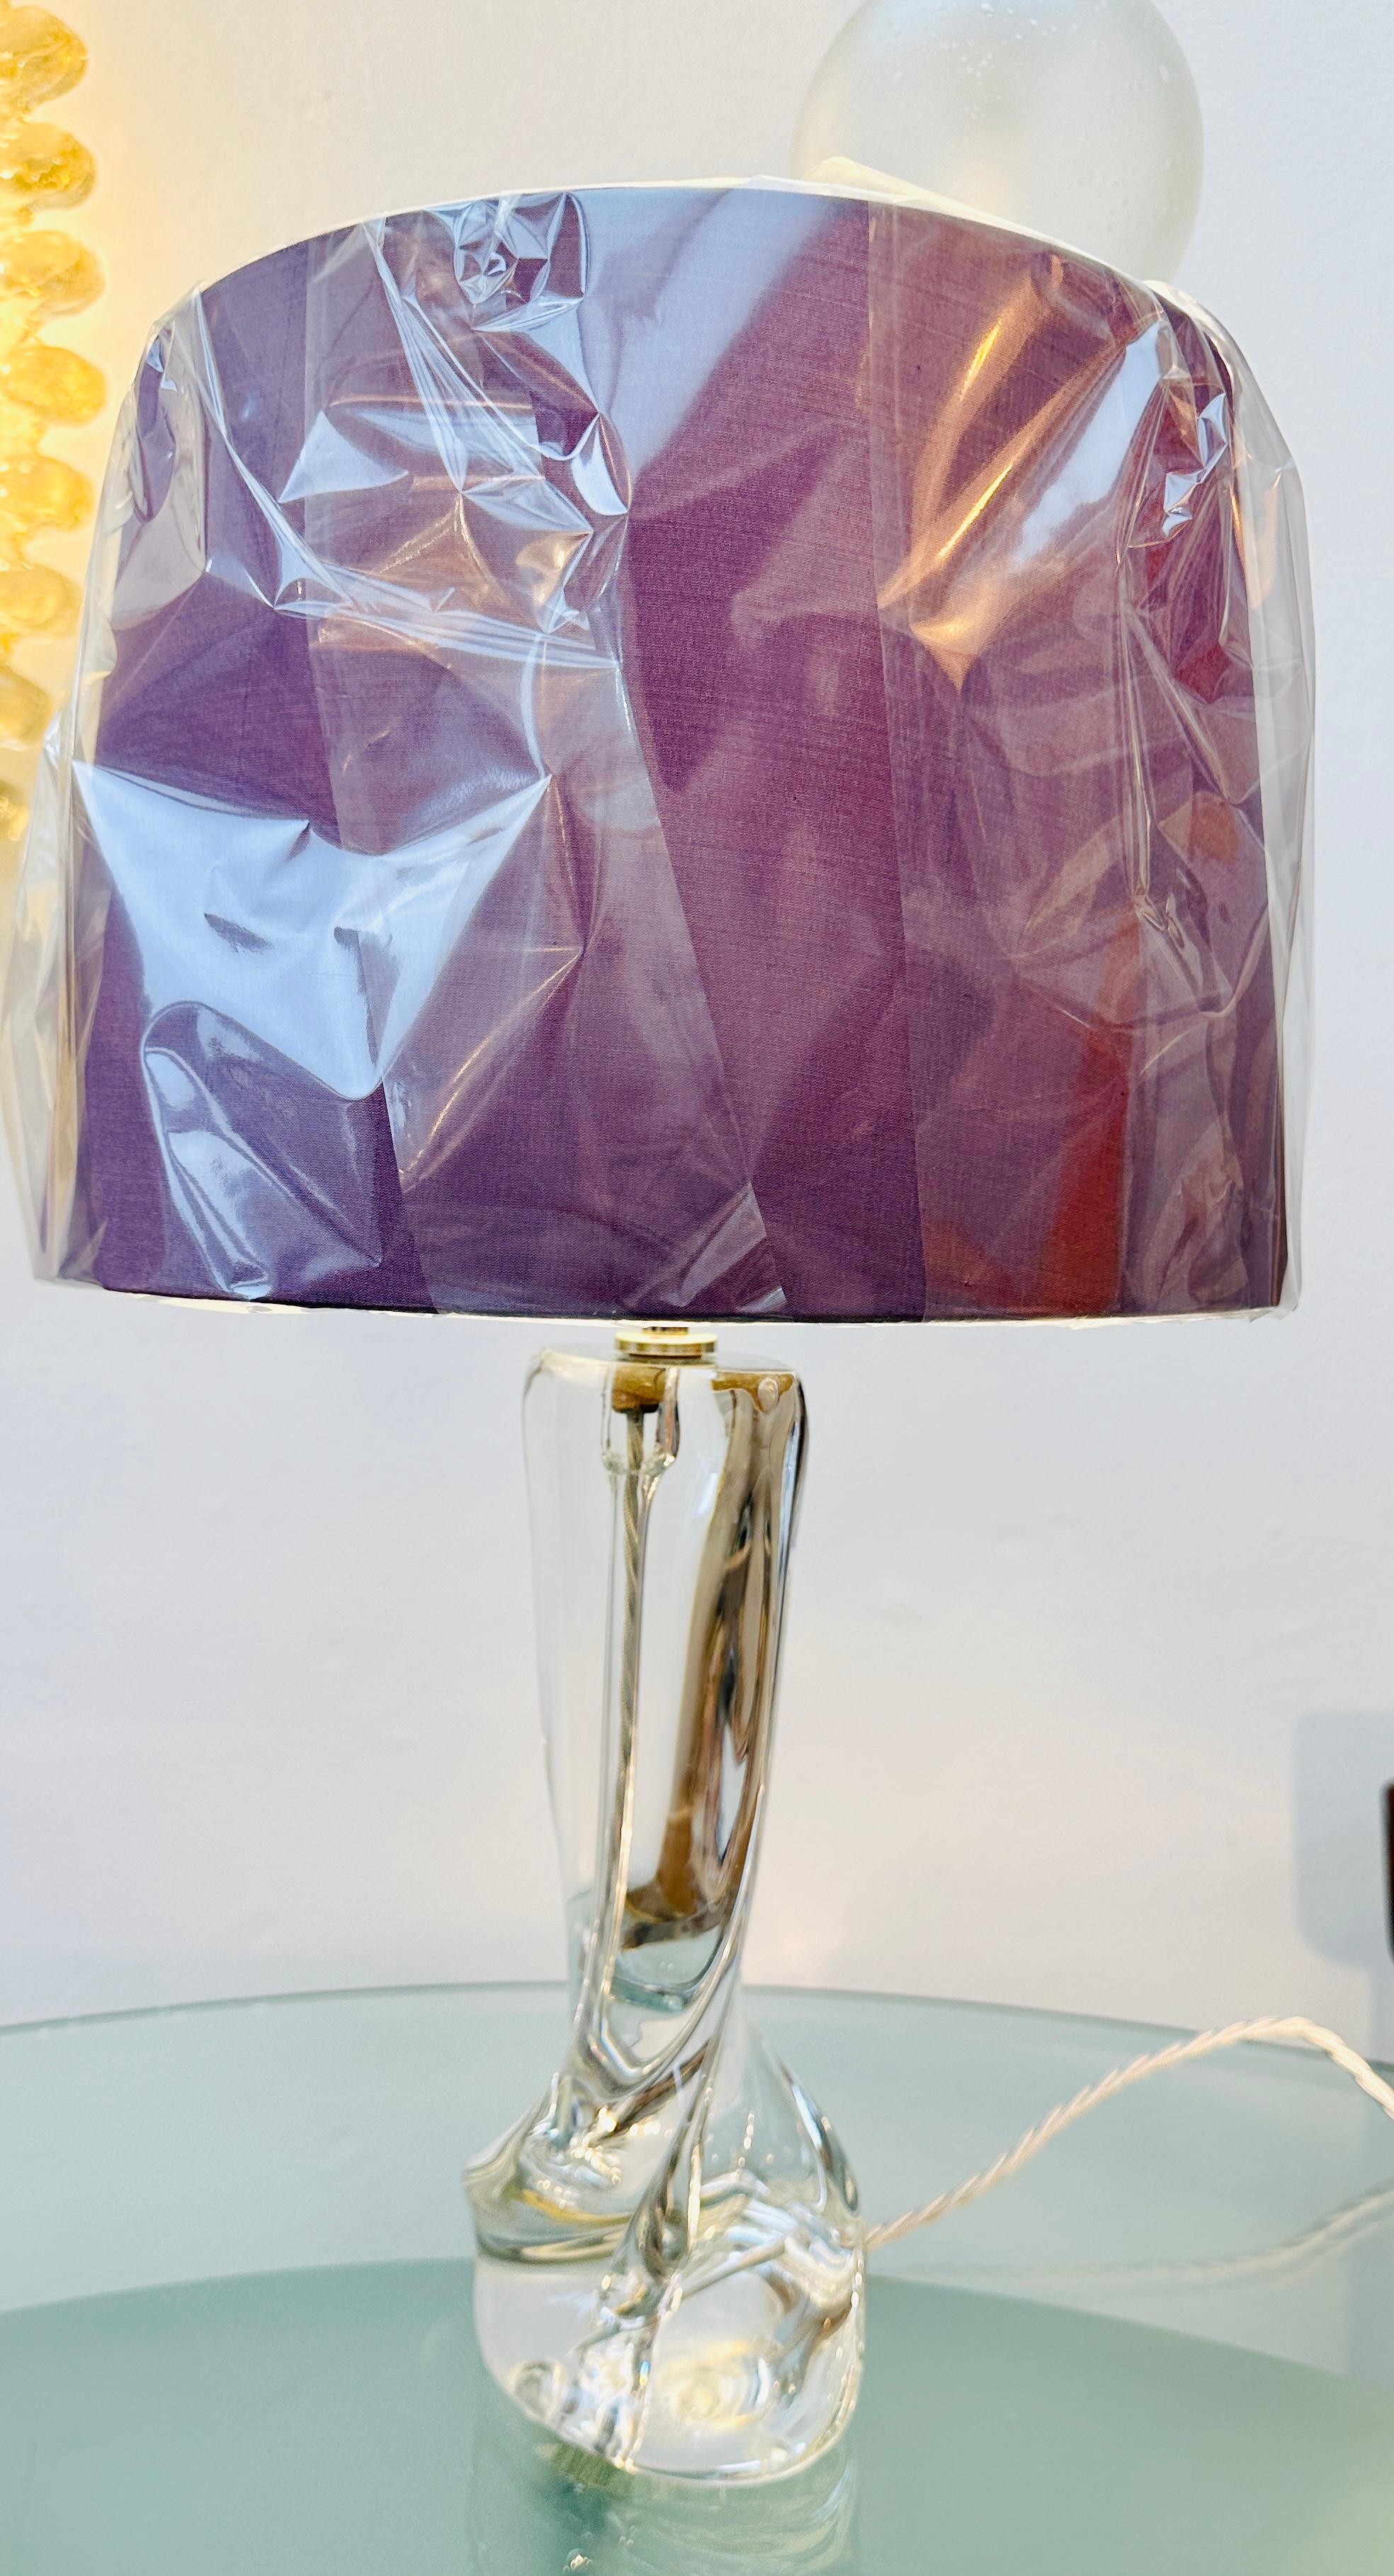 1950s Modernist French Cristalleries De Sèvre Crystal Glass & Chrome Table Lamp In Good Condition For Sale In London, GB